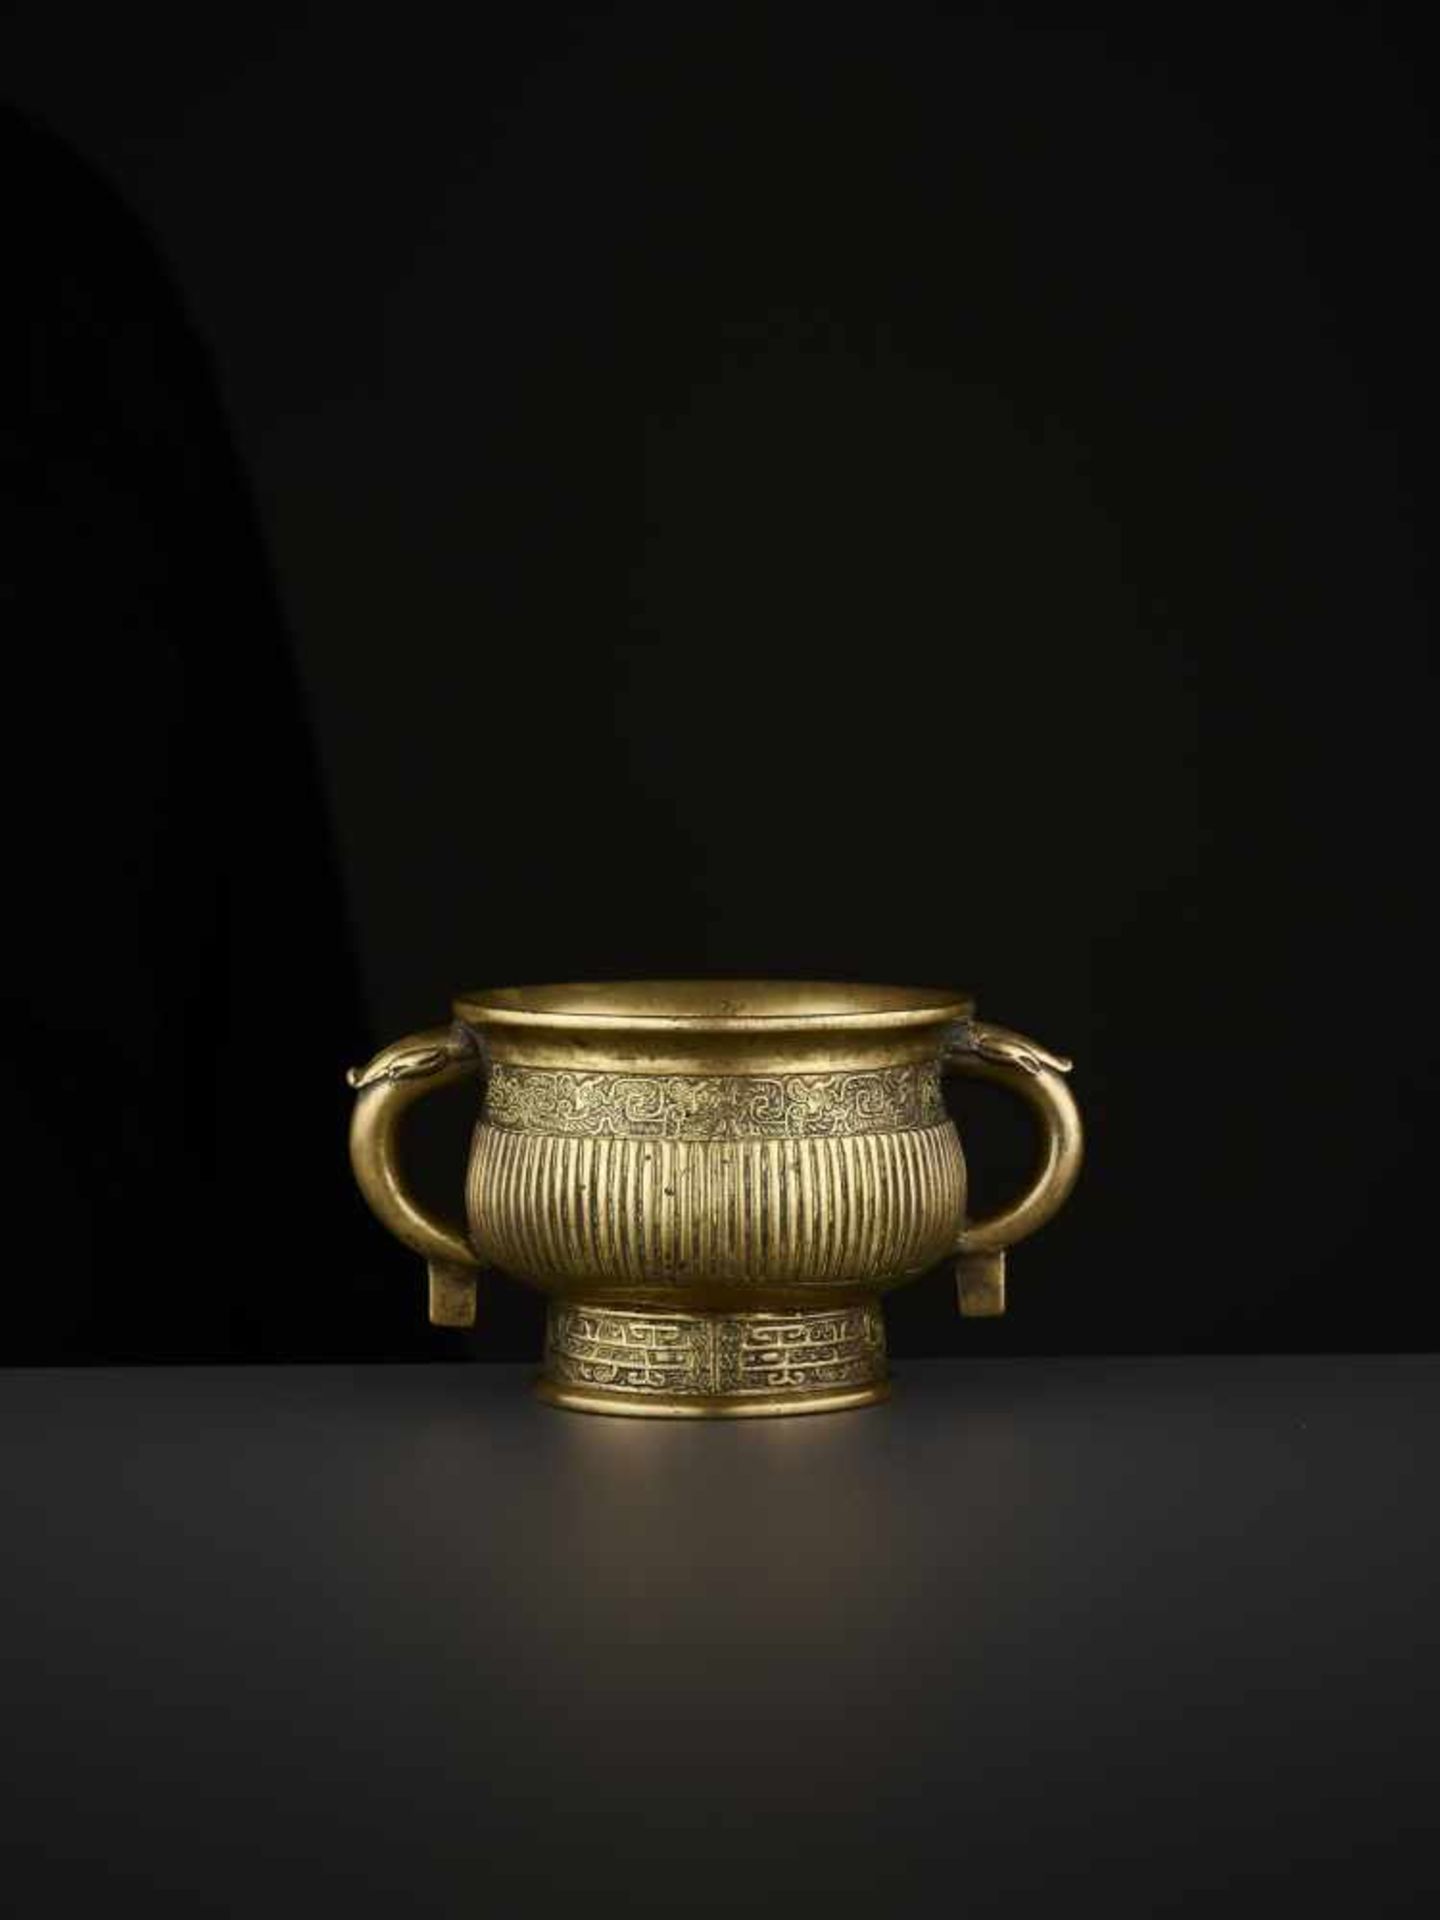 AN ARCHAISTIC BRONZE CENSER, QING China, 18th-19th century. The vessel with two circumferential